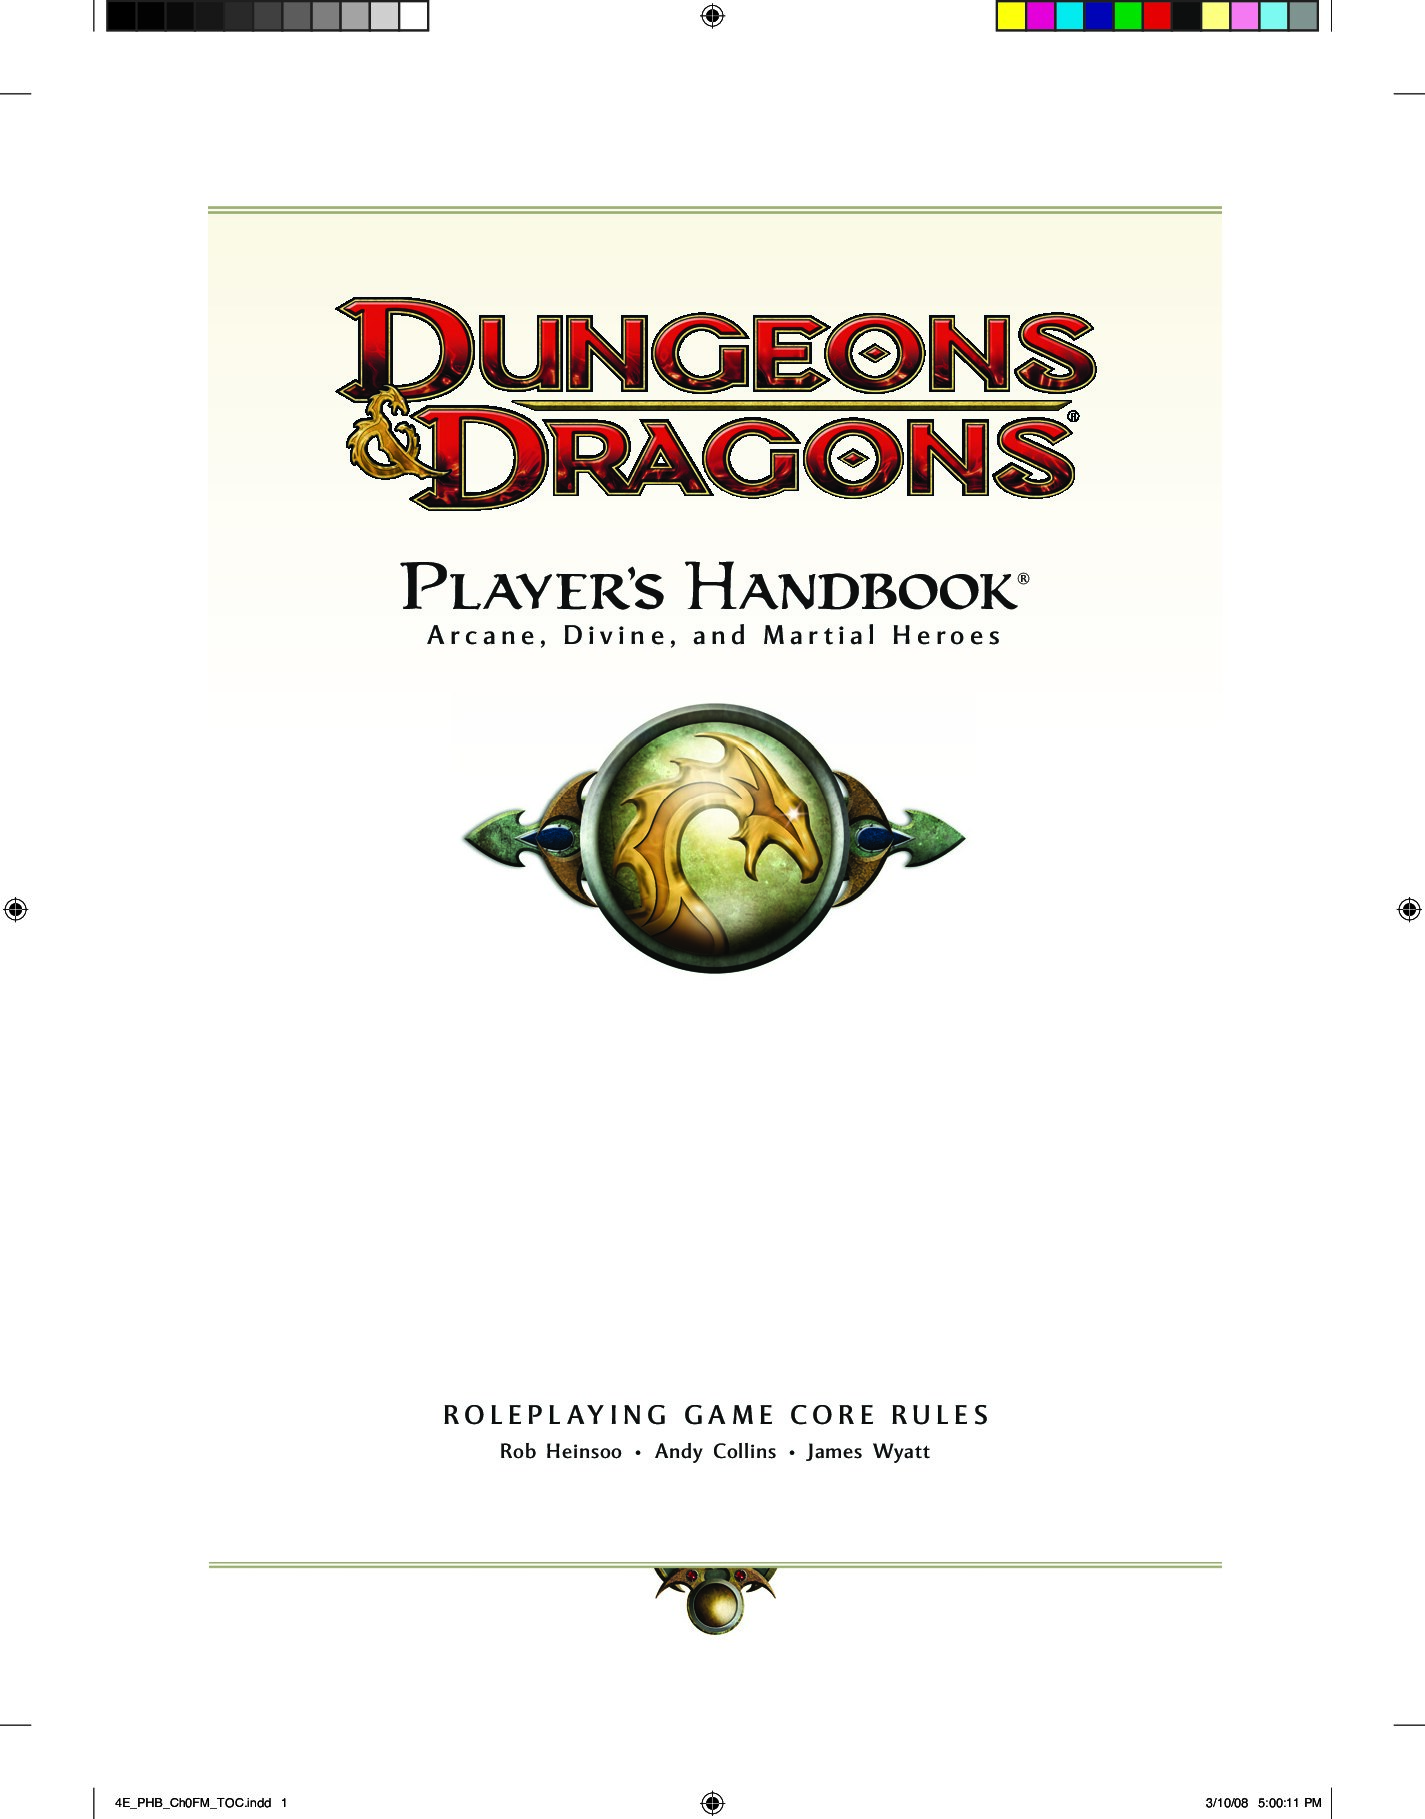 Dungeons and Dragons 4th: Player's Handbook